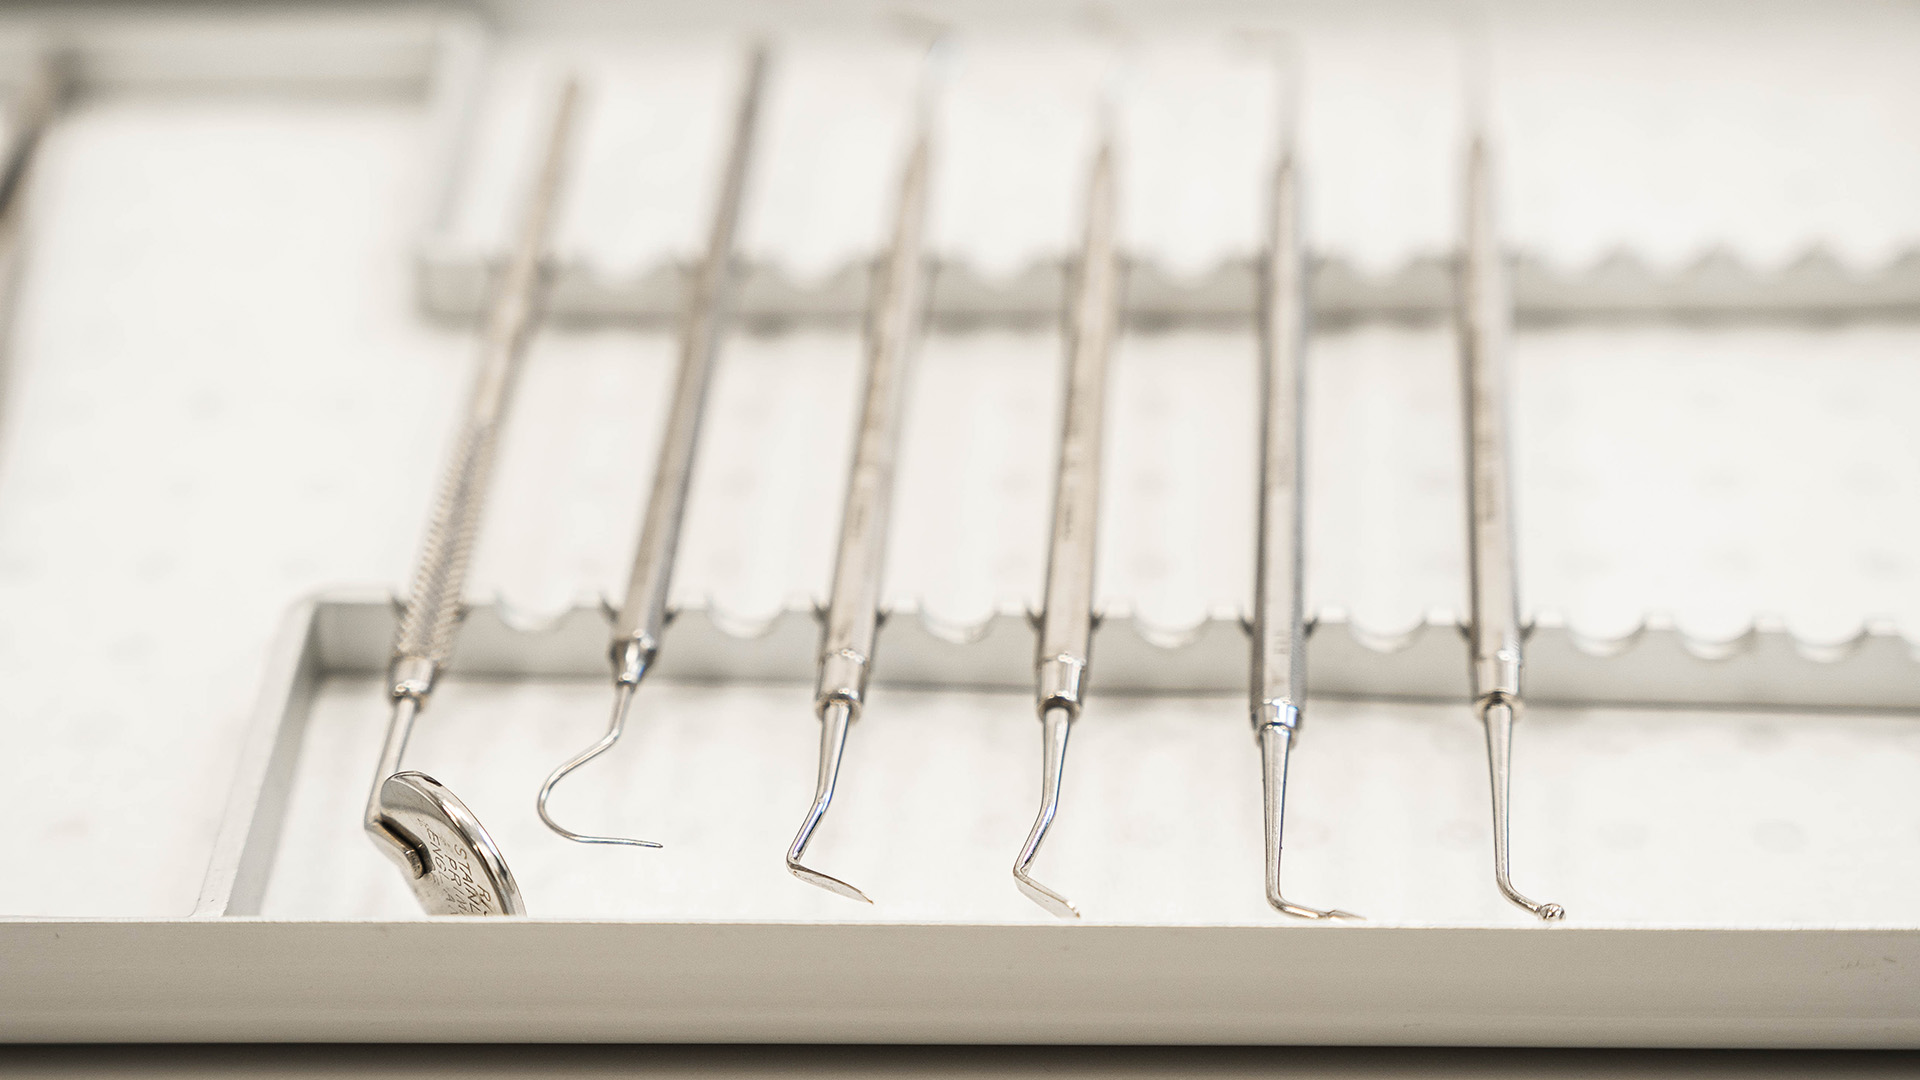 Dentists tools lined up on a tray.